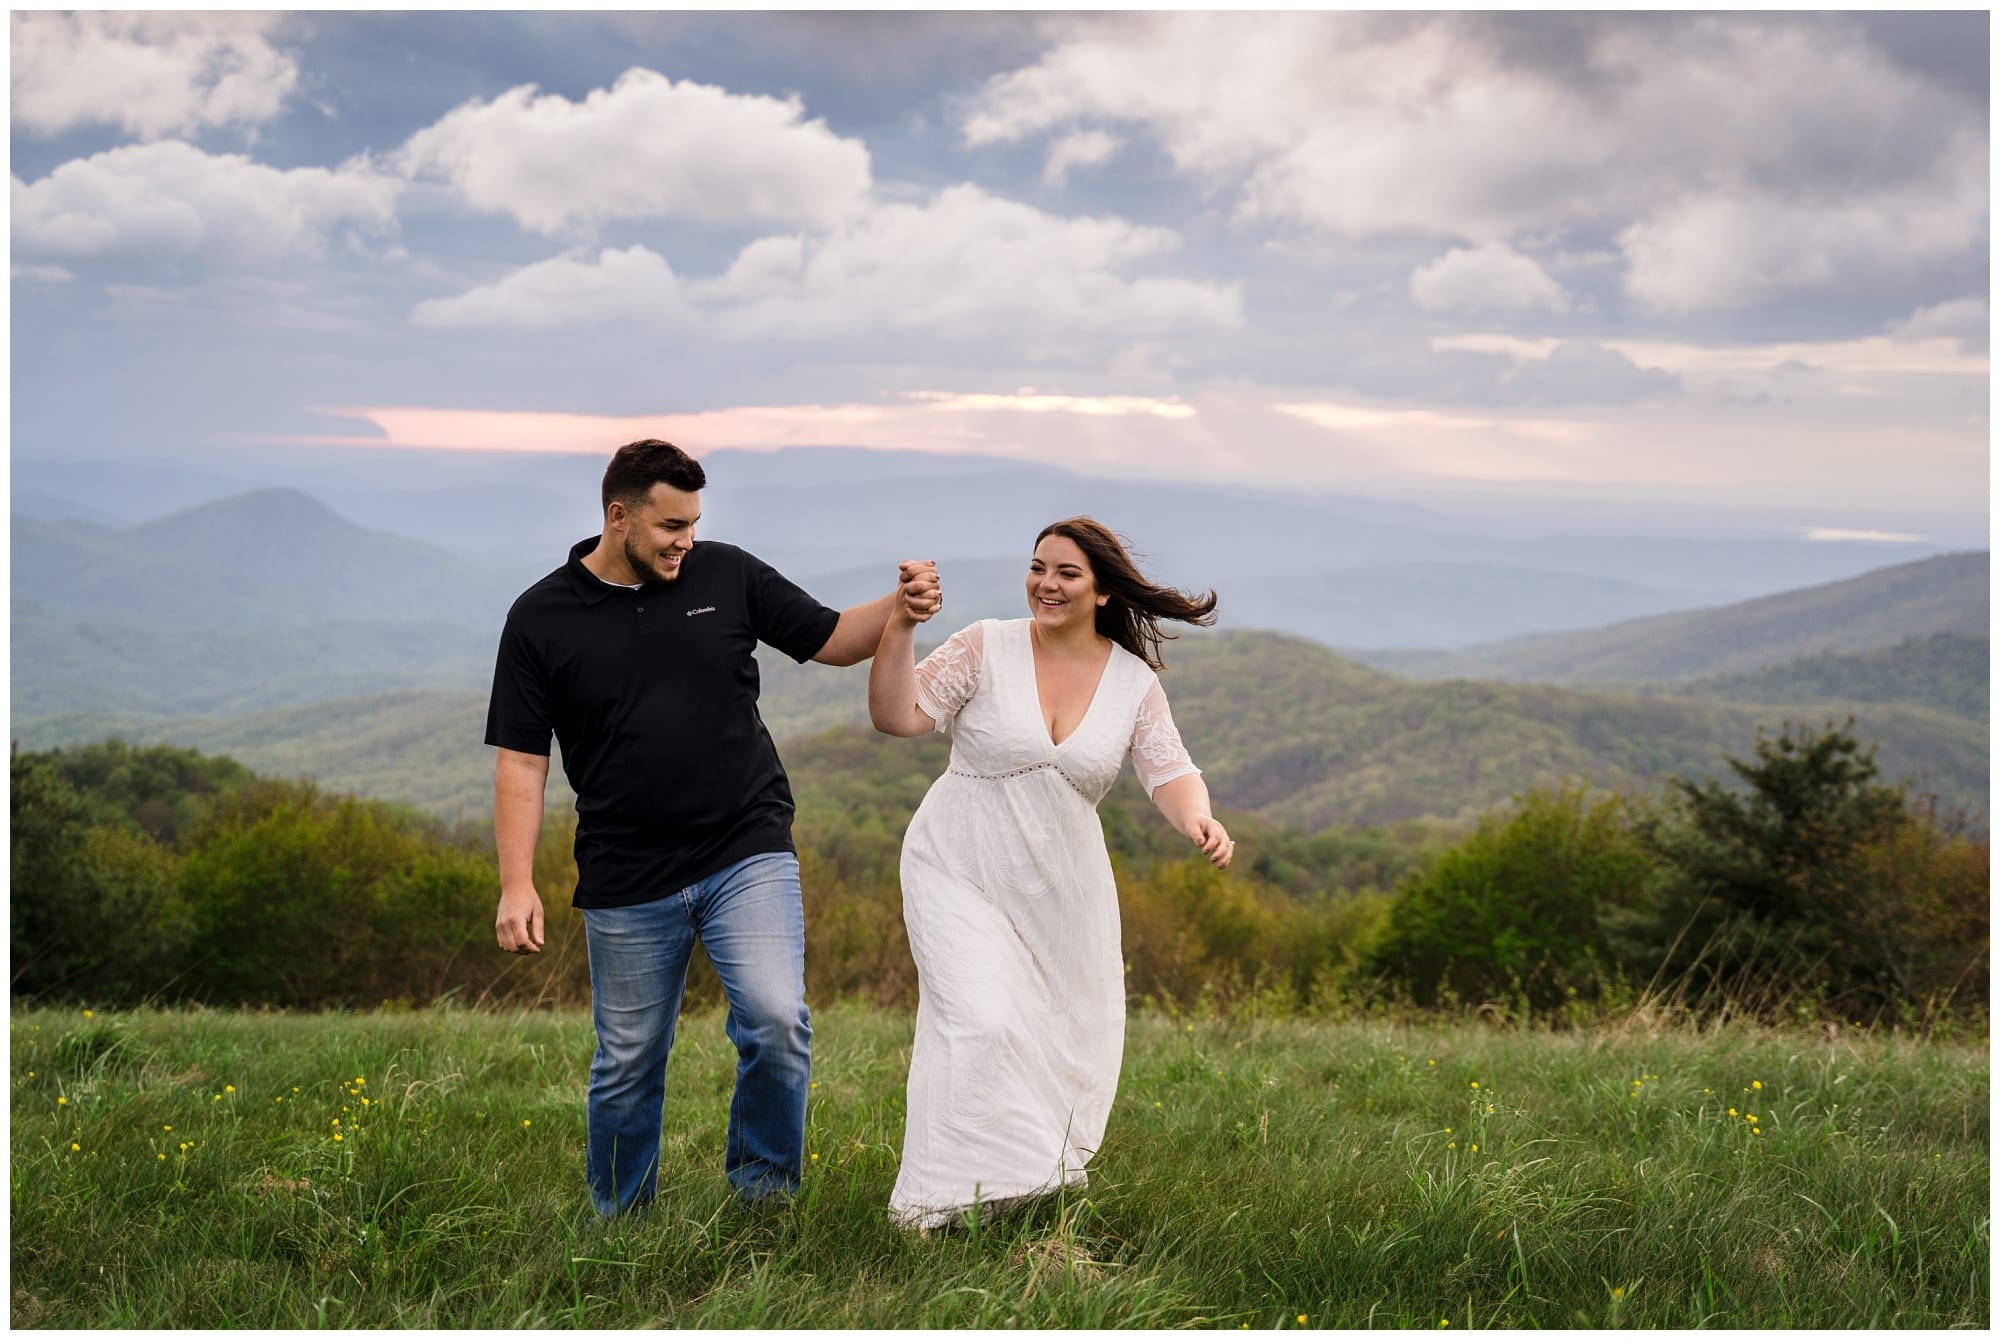 young engaged couple holding hands walking through grassy field overlooking mountain range smiling at one another